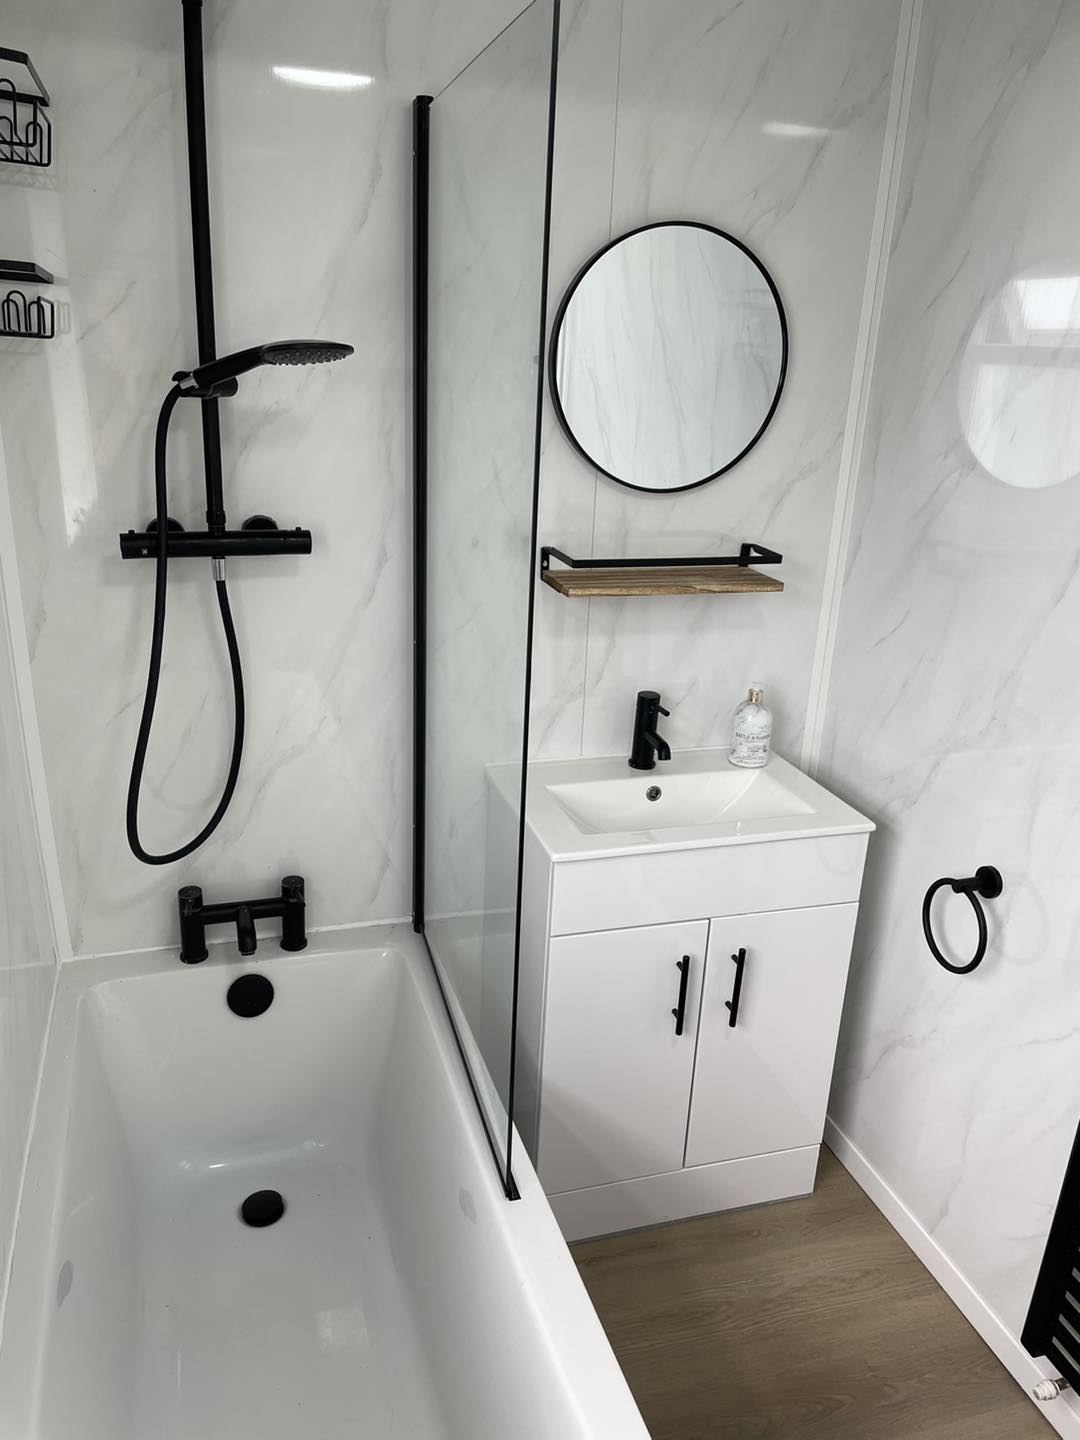 Black and white bath and sink